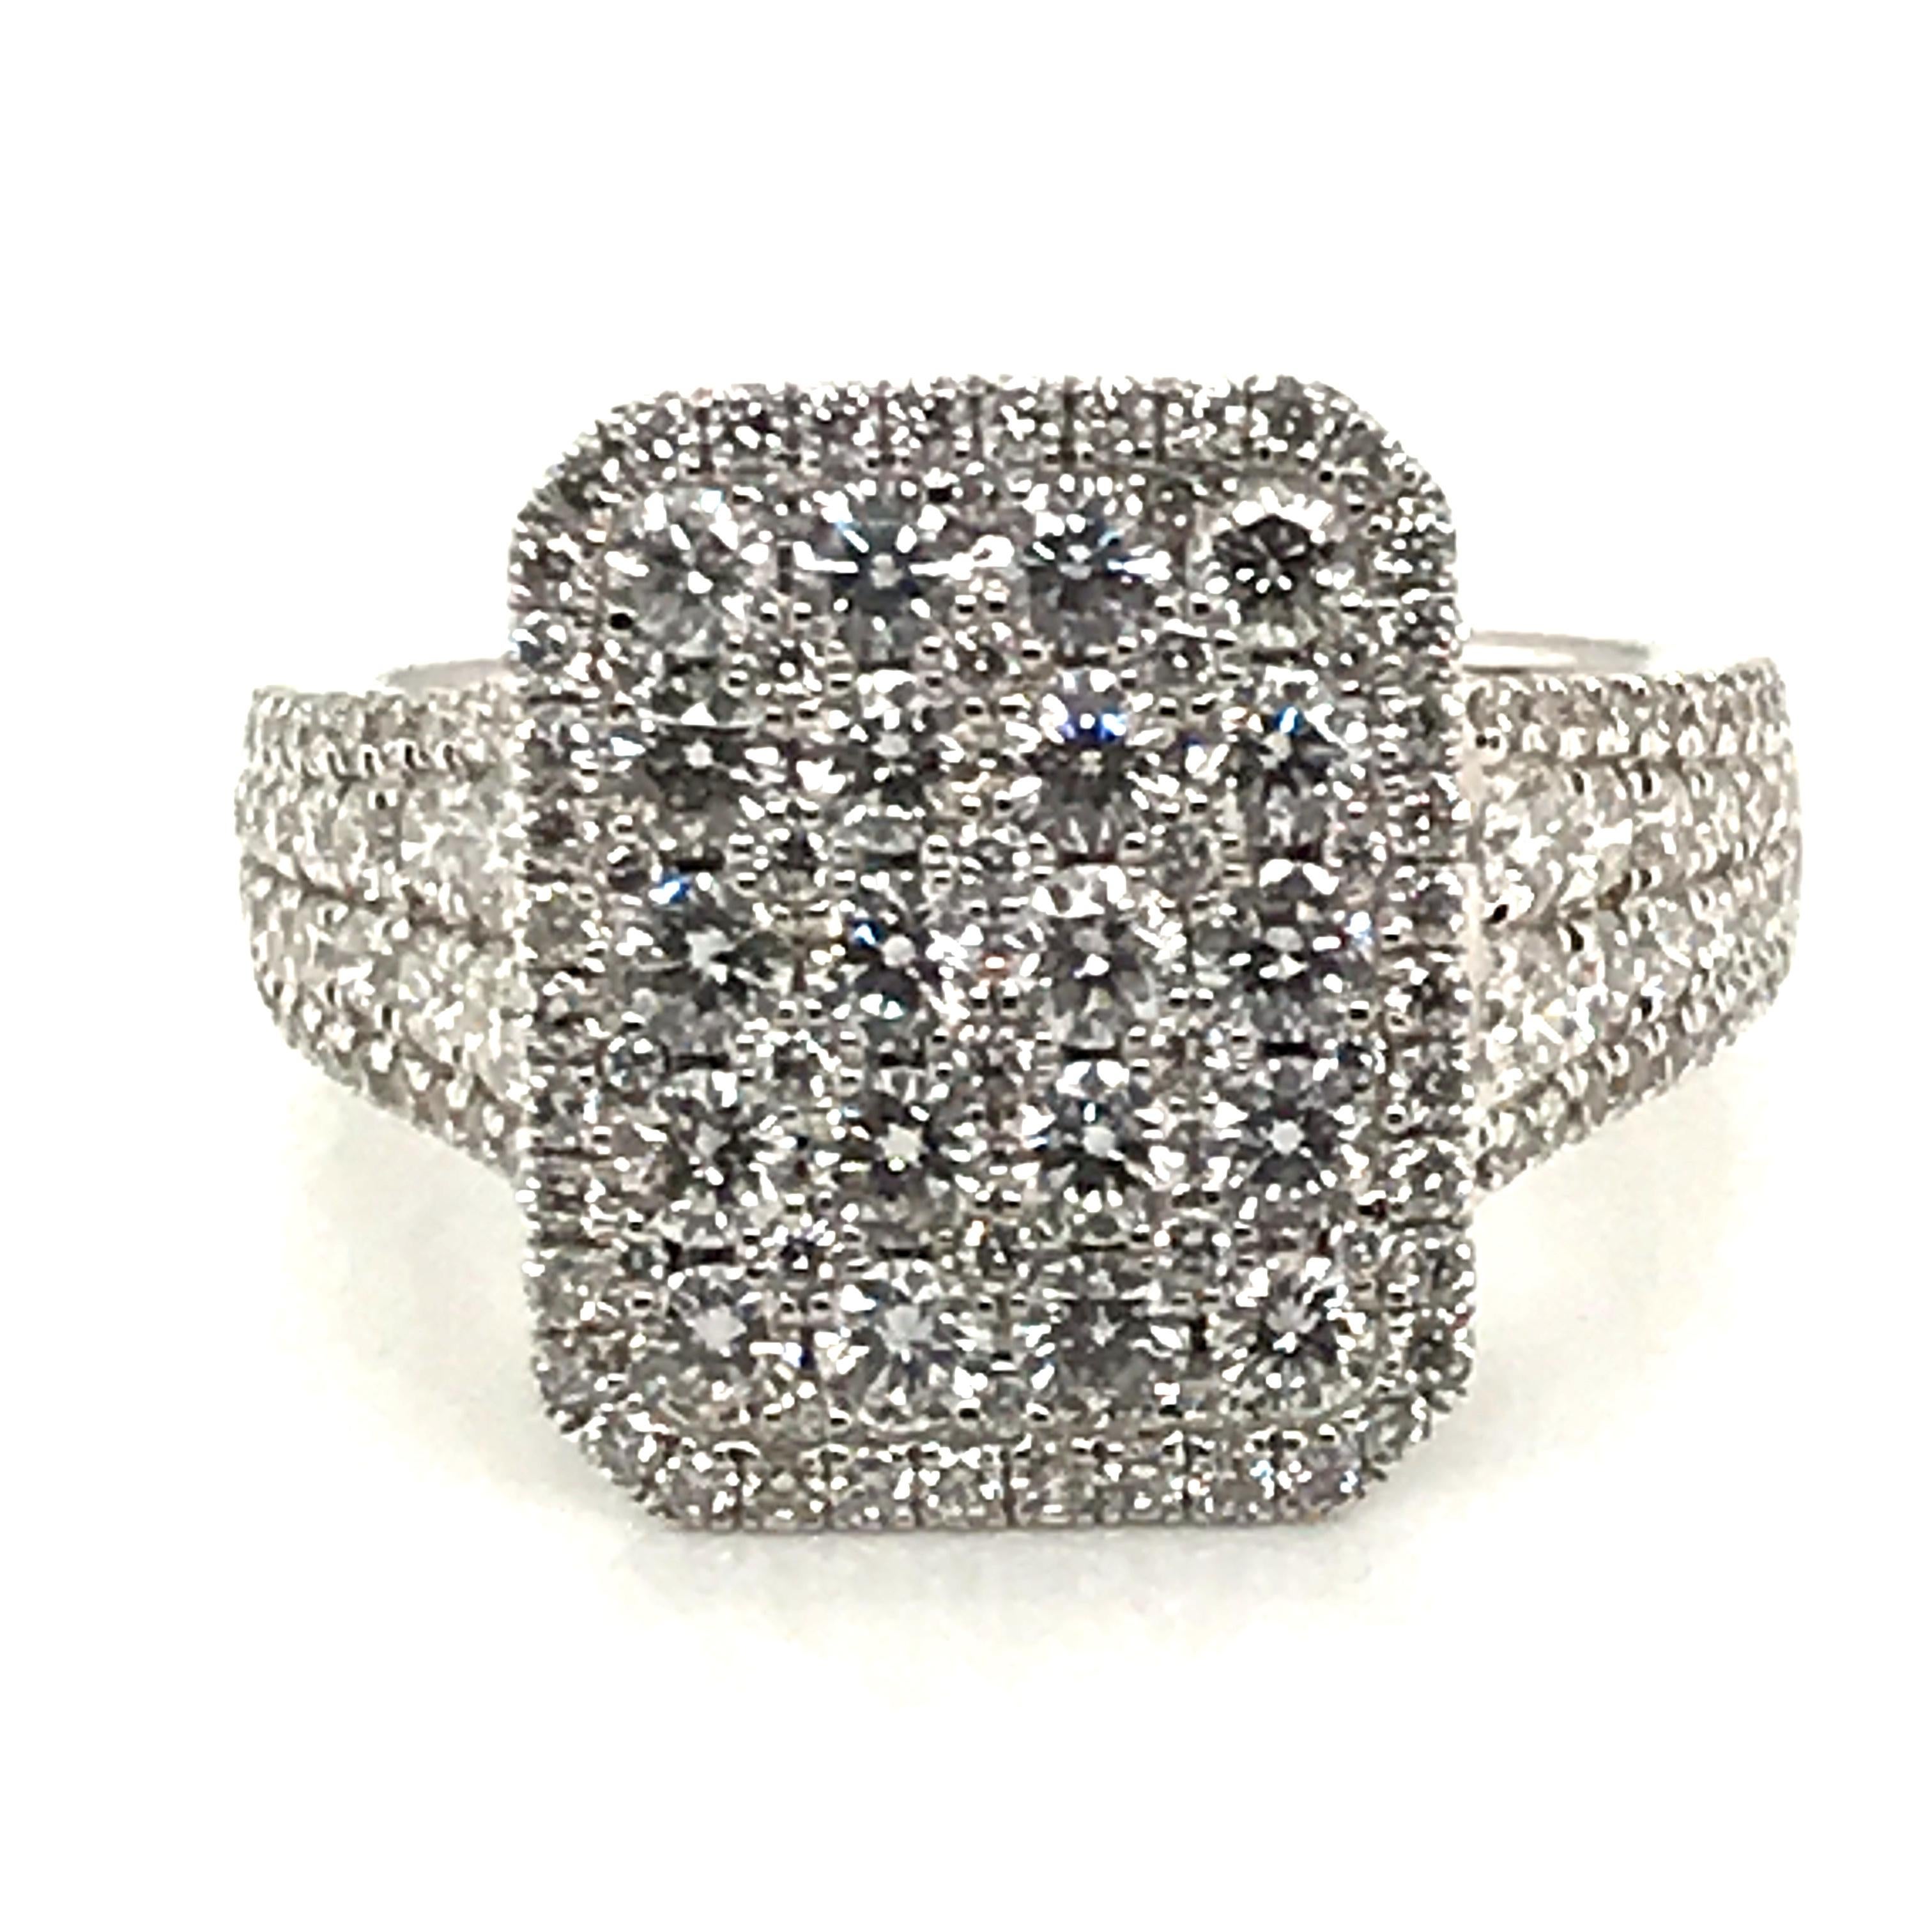 HJN Inc. Ring featuring a 2.09 Carat Facet White Diamond Ring With 18K White Gold

Round-Cut Diamond Weight: 2.09 Carats

Total Stones: 154
Clarity Grade: SI1
Color Grade: H
Total Diamond Weight: 2.09 Carats
Polish and Symmetry: Very Good
Style